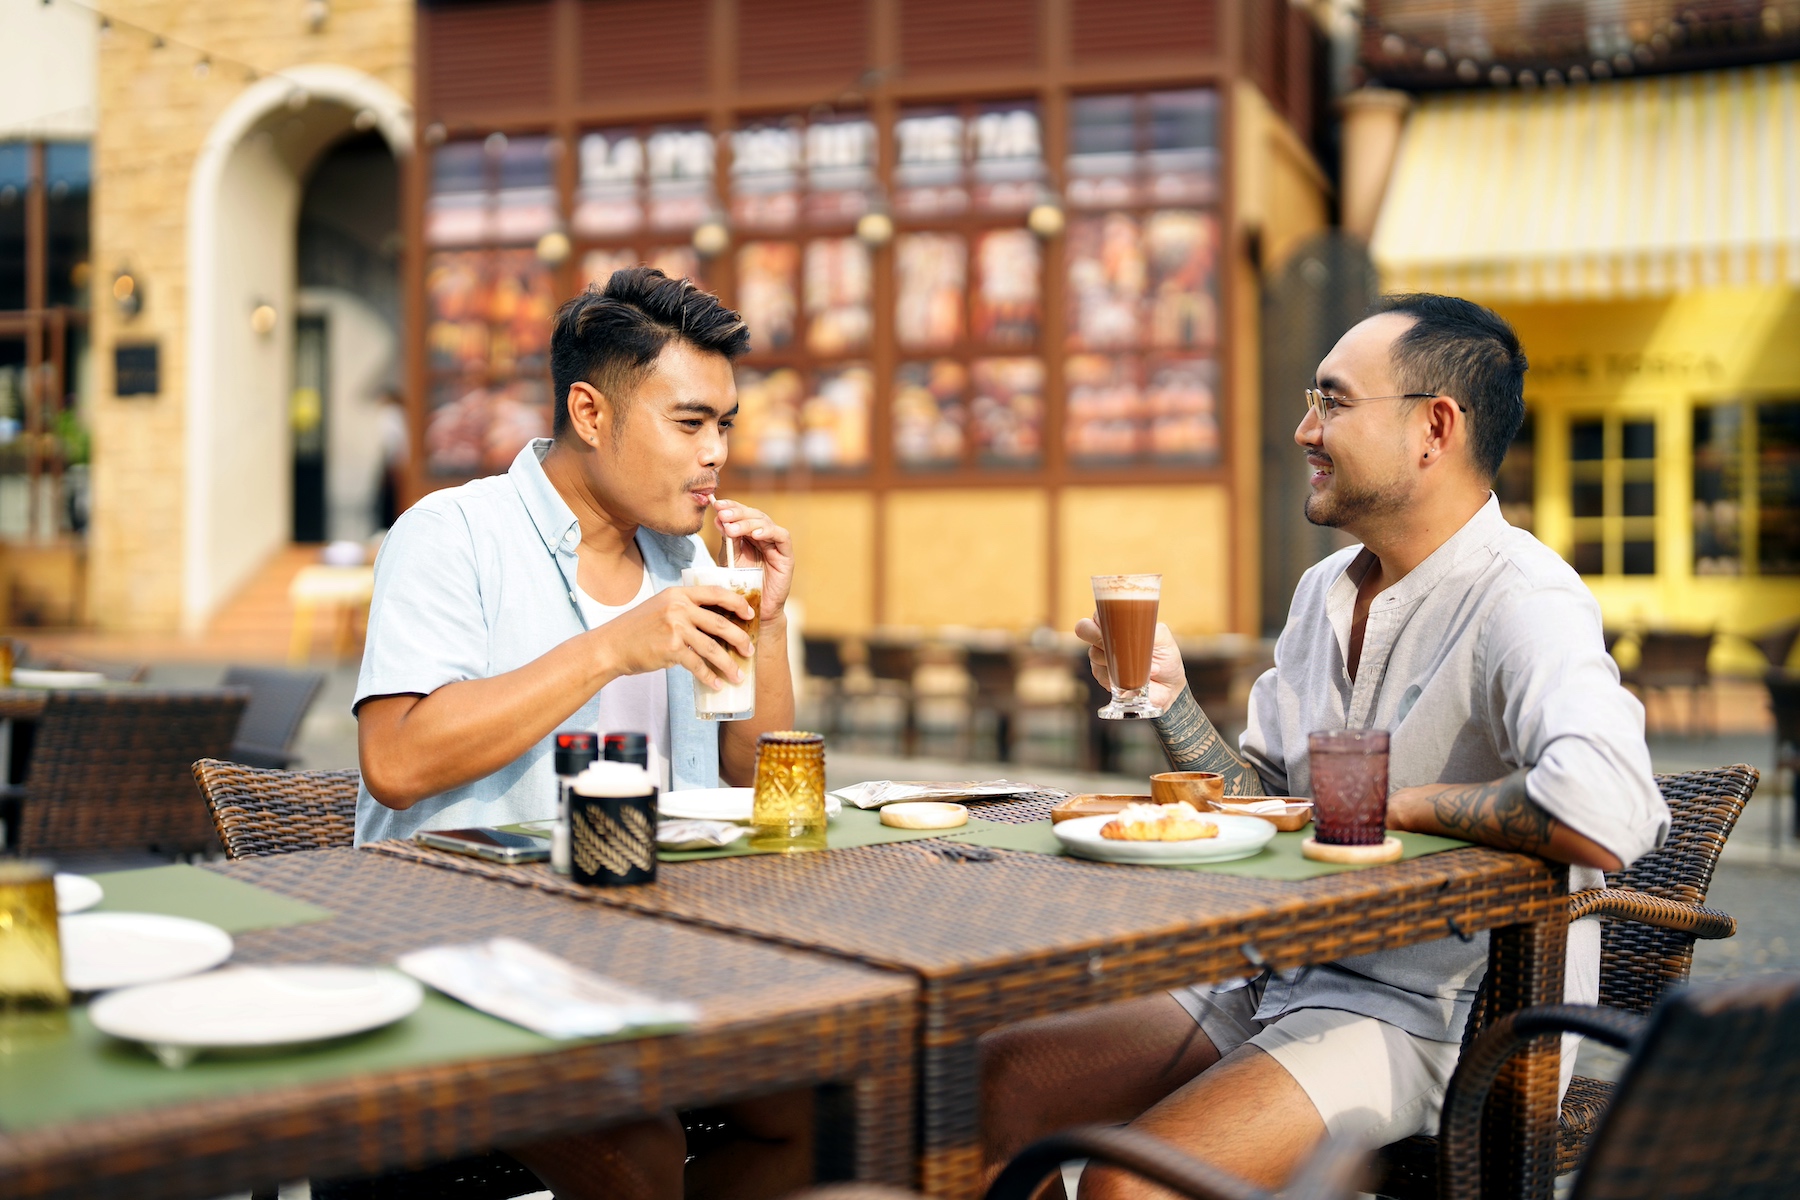 Two men sit at an outdoor cafe with coffee and pastries